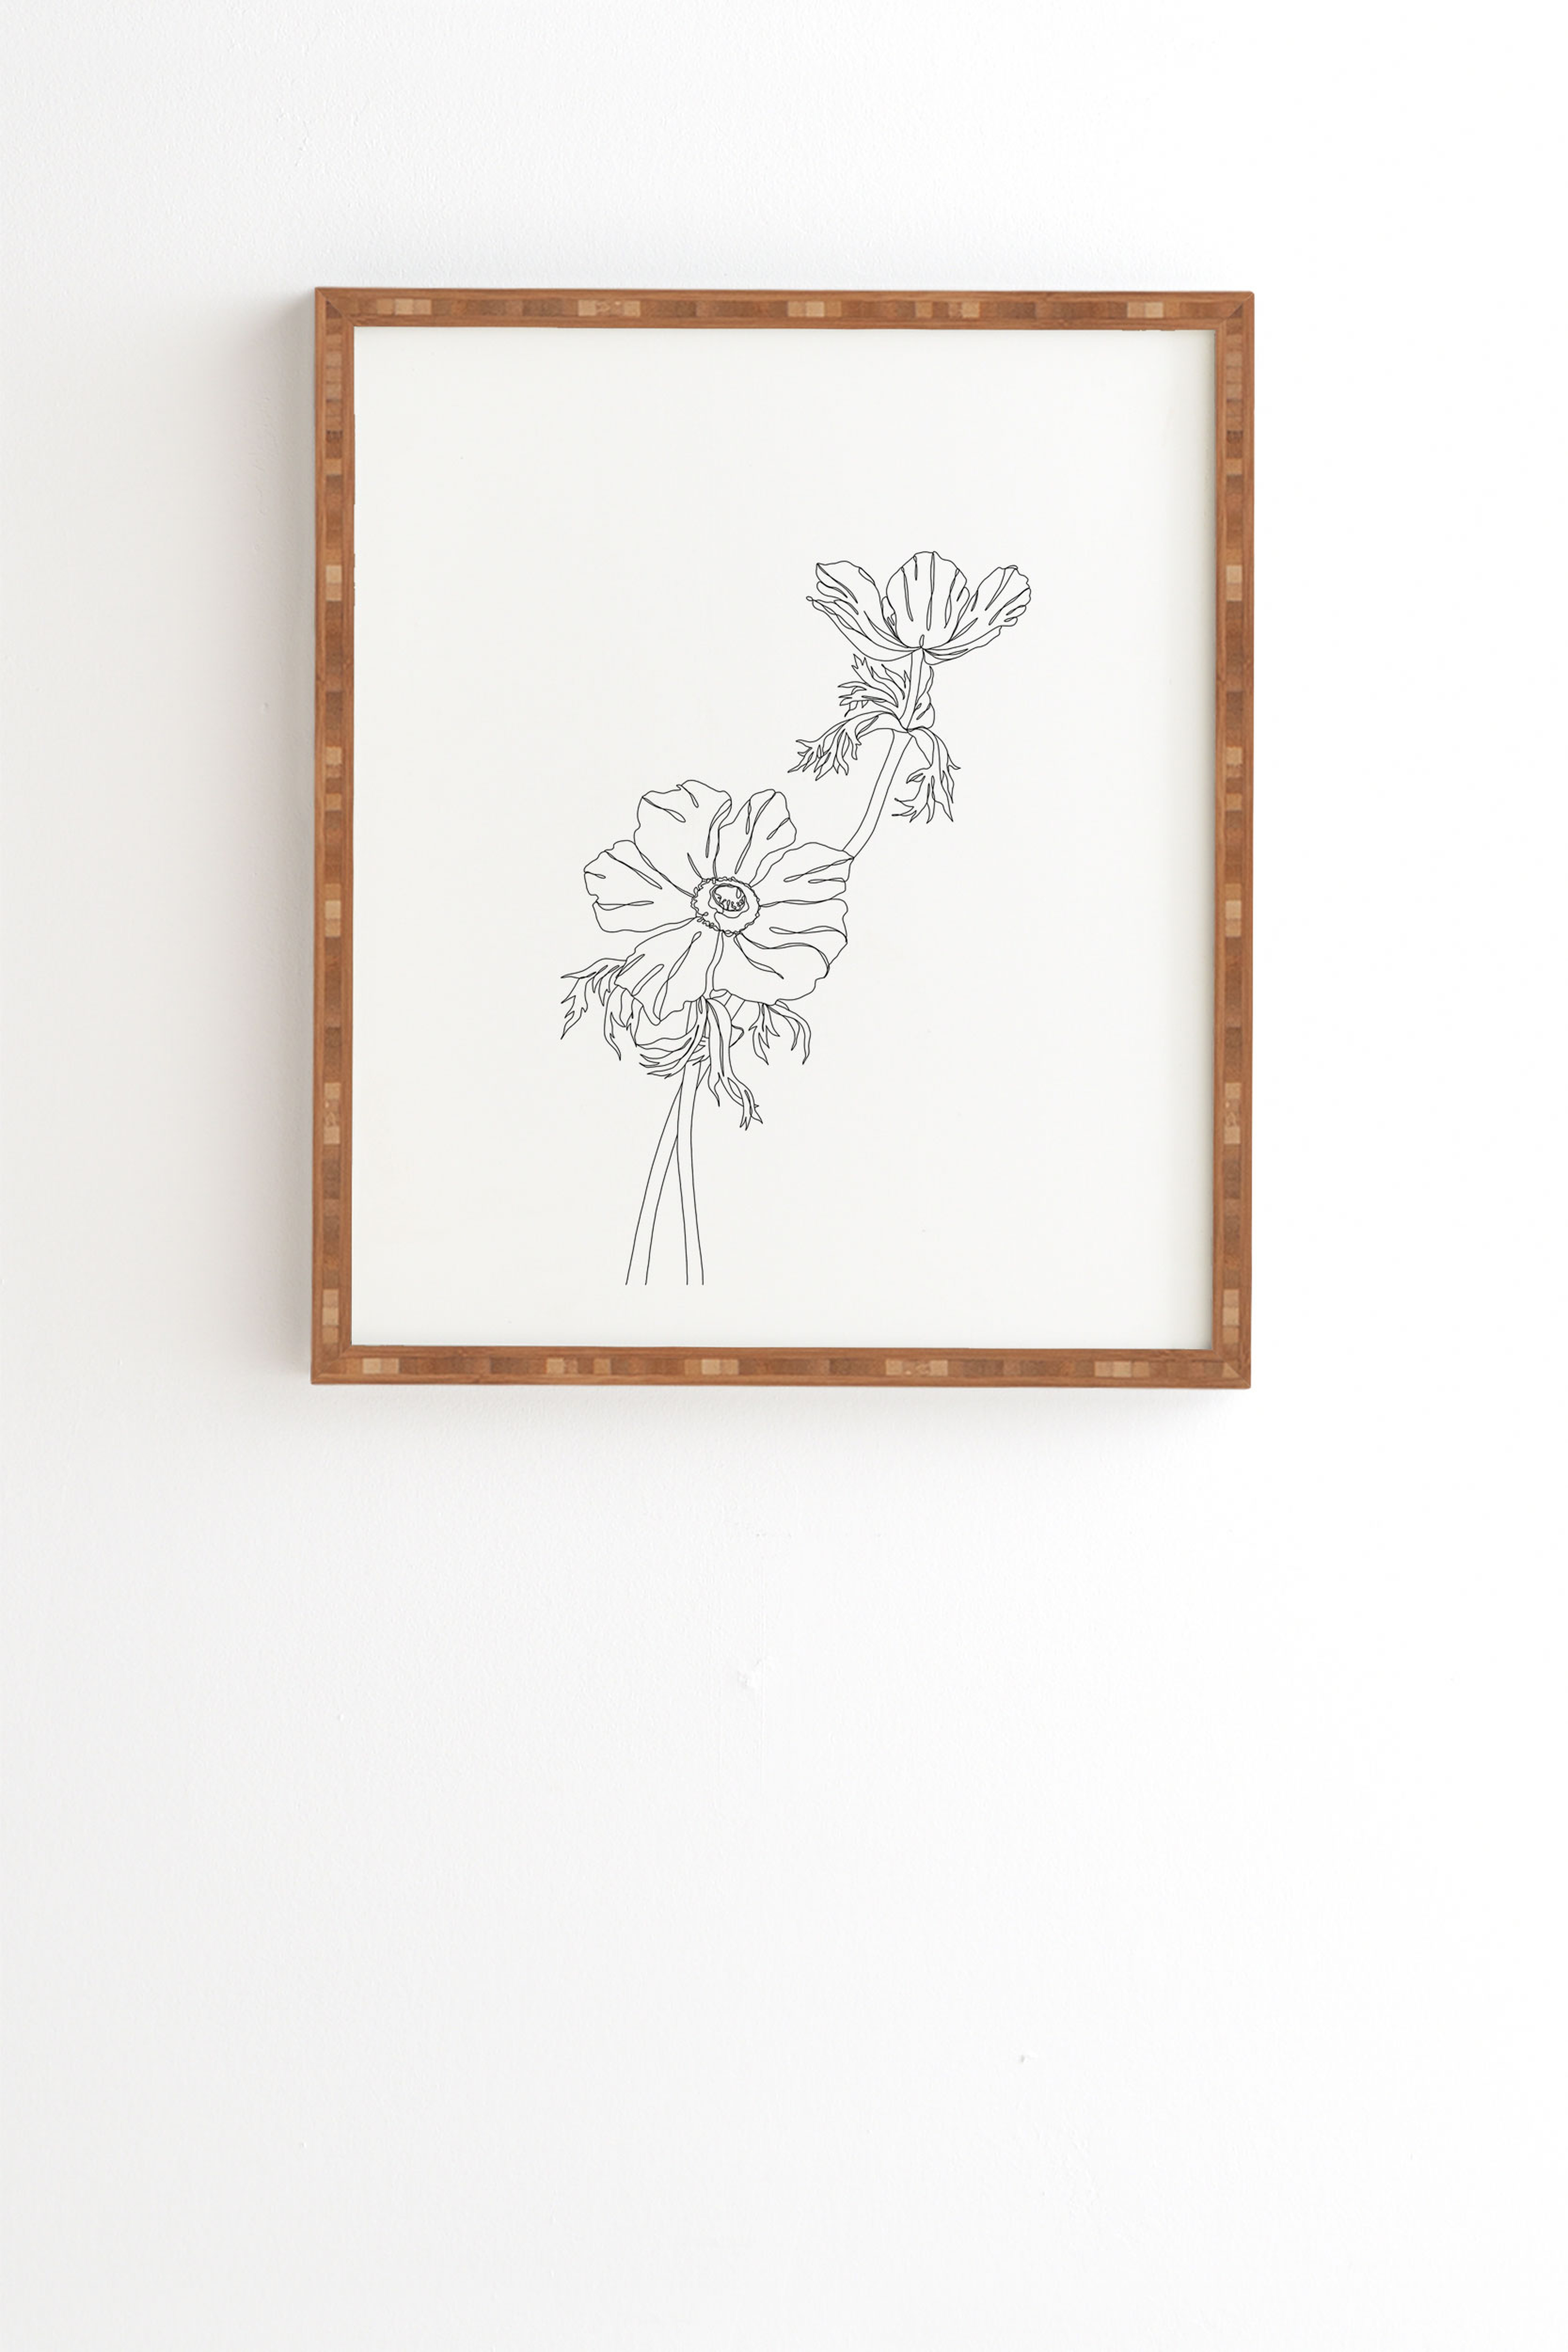 Botanical Illustration Joan by The Colour Study - Framed Wall Art Bamboo 14" x 16.5" - Wander Print Co.